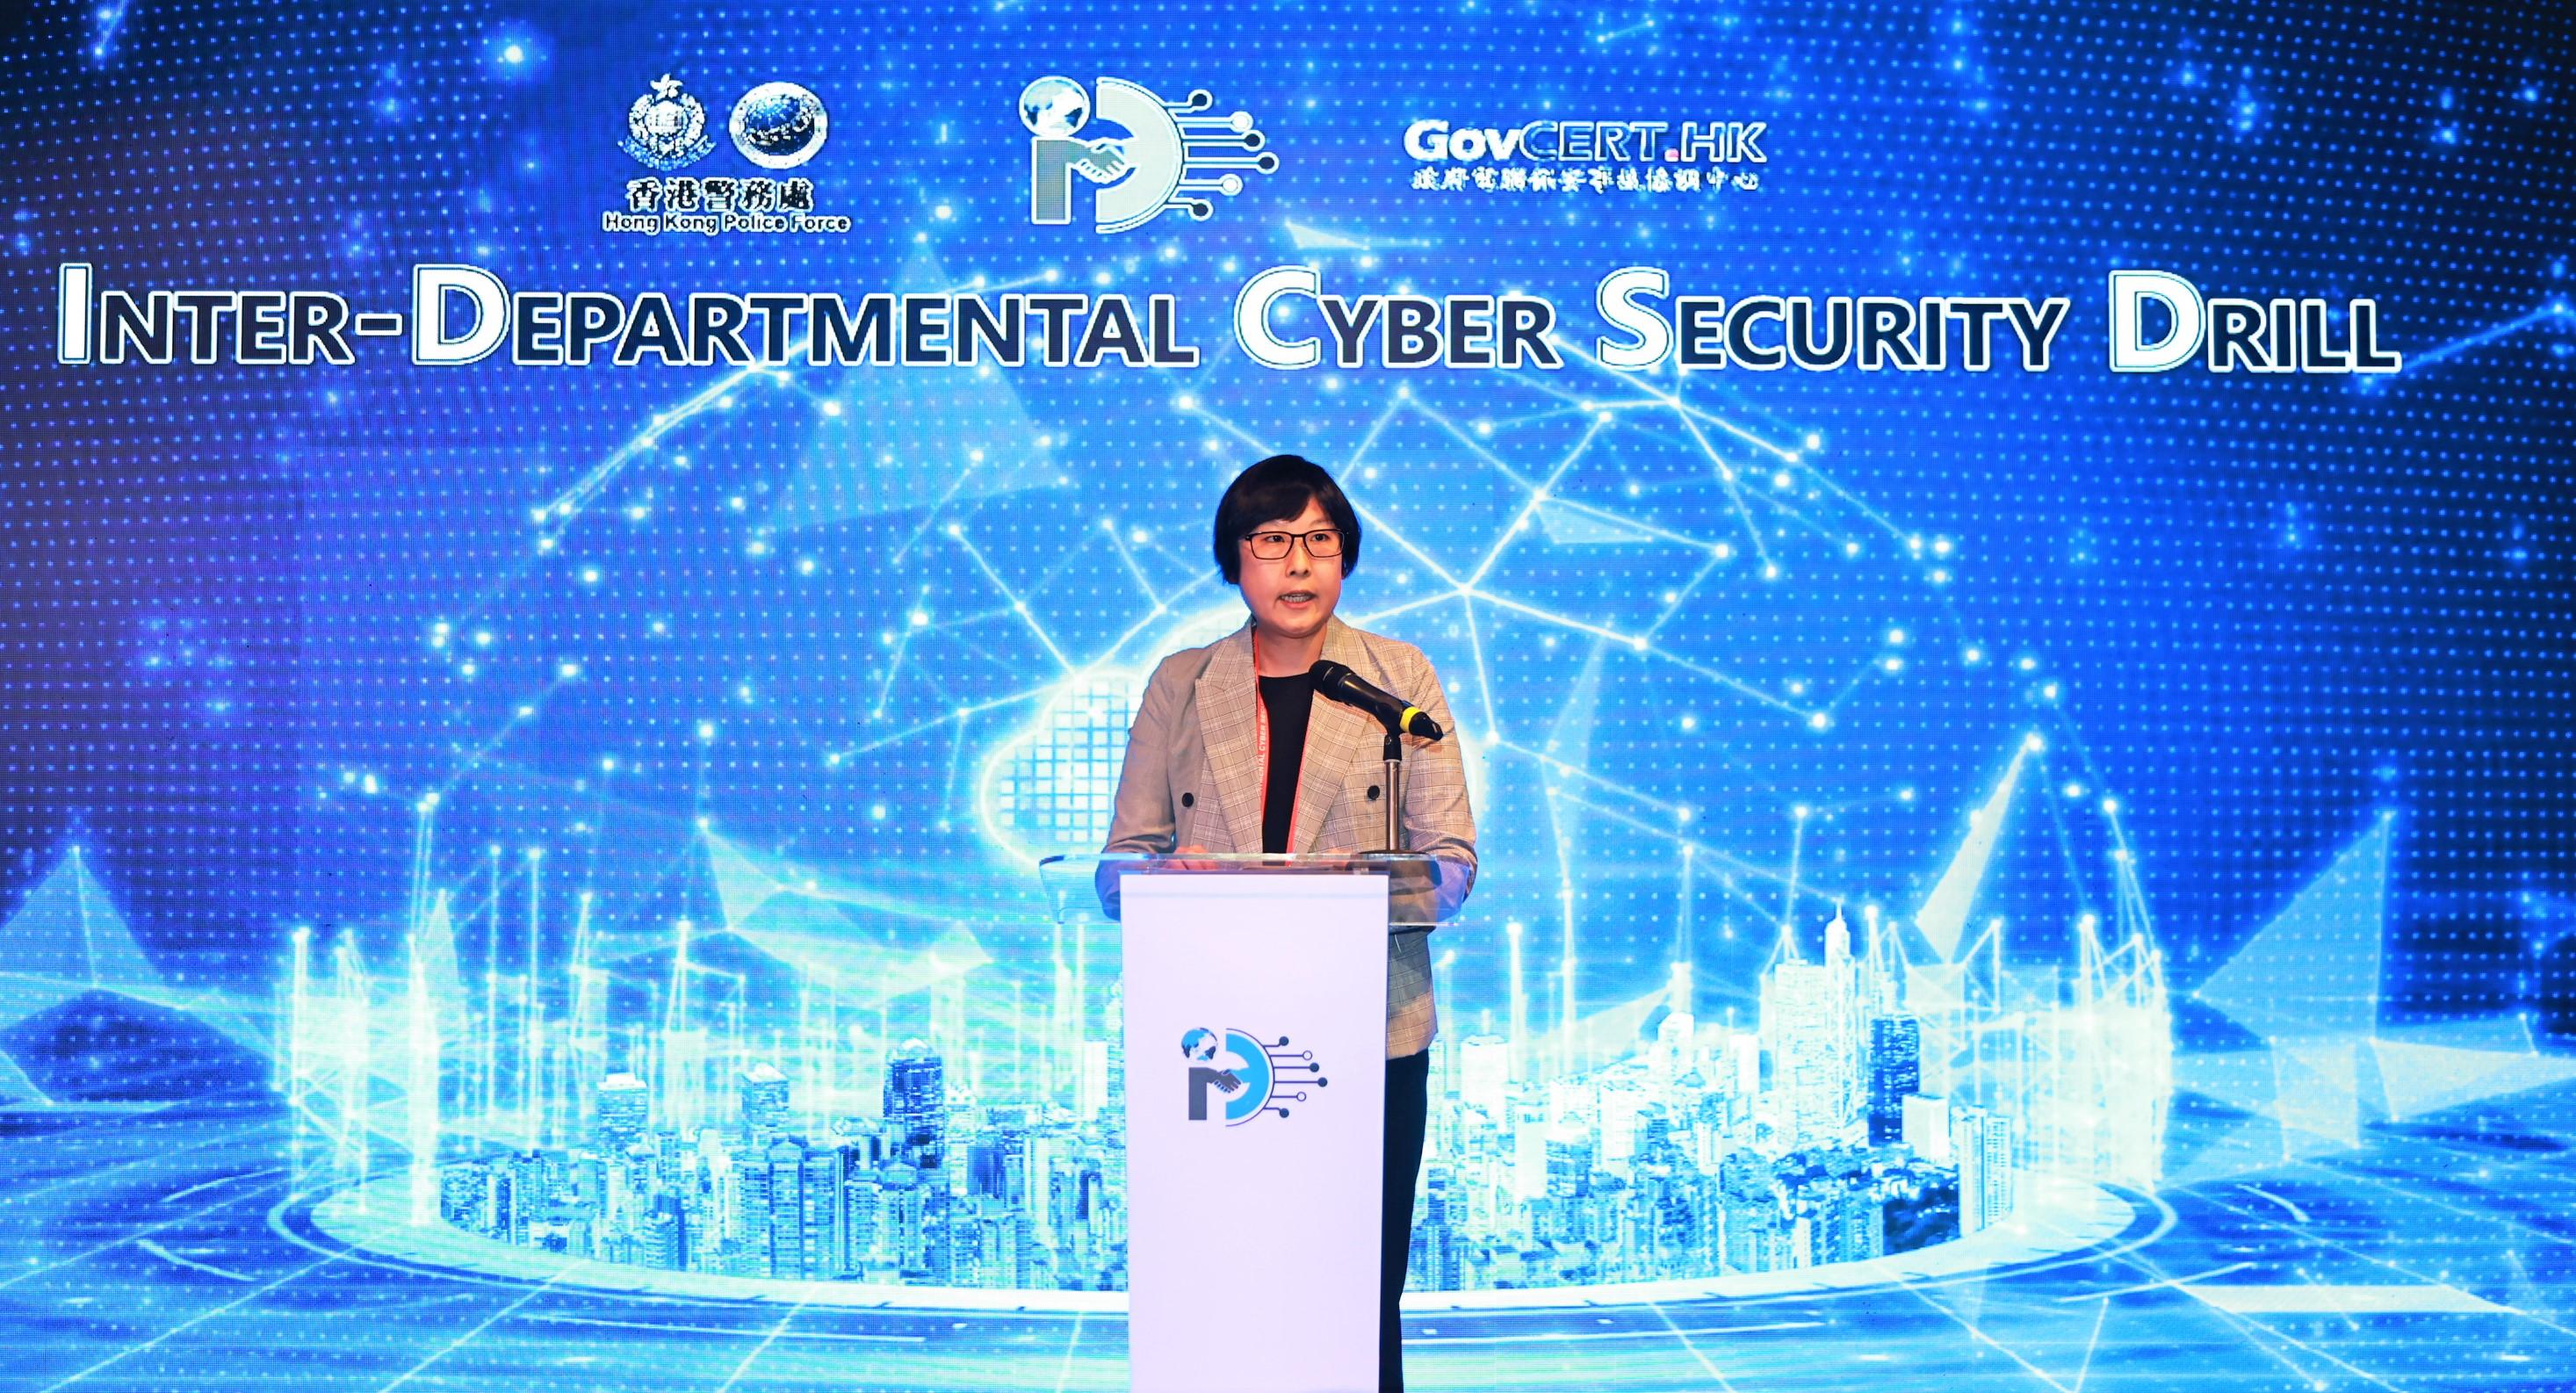 The Cyber Security and Technology Crime Bureau of the Hong Kong Police Force and the Government Computer Emergency Response Team Hong Kong under the Office of the Government Chief Information Officer co-organised the 7th Inter-departmental Cyber Security Drill today (March 22). Photo shows Assistant Commissioner of Police (Crime), Ms Chung Wing-man, delivering opening remarks.